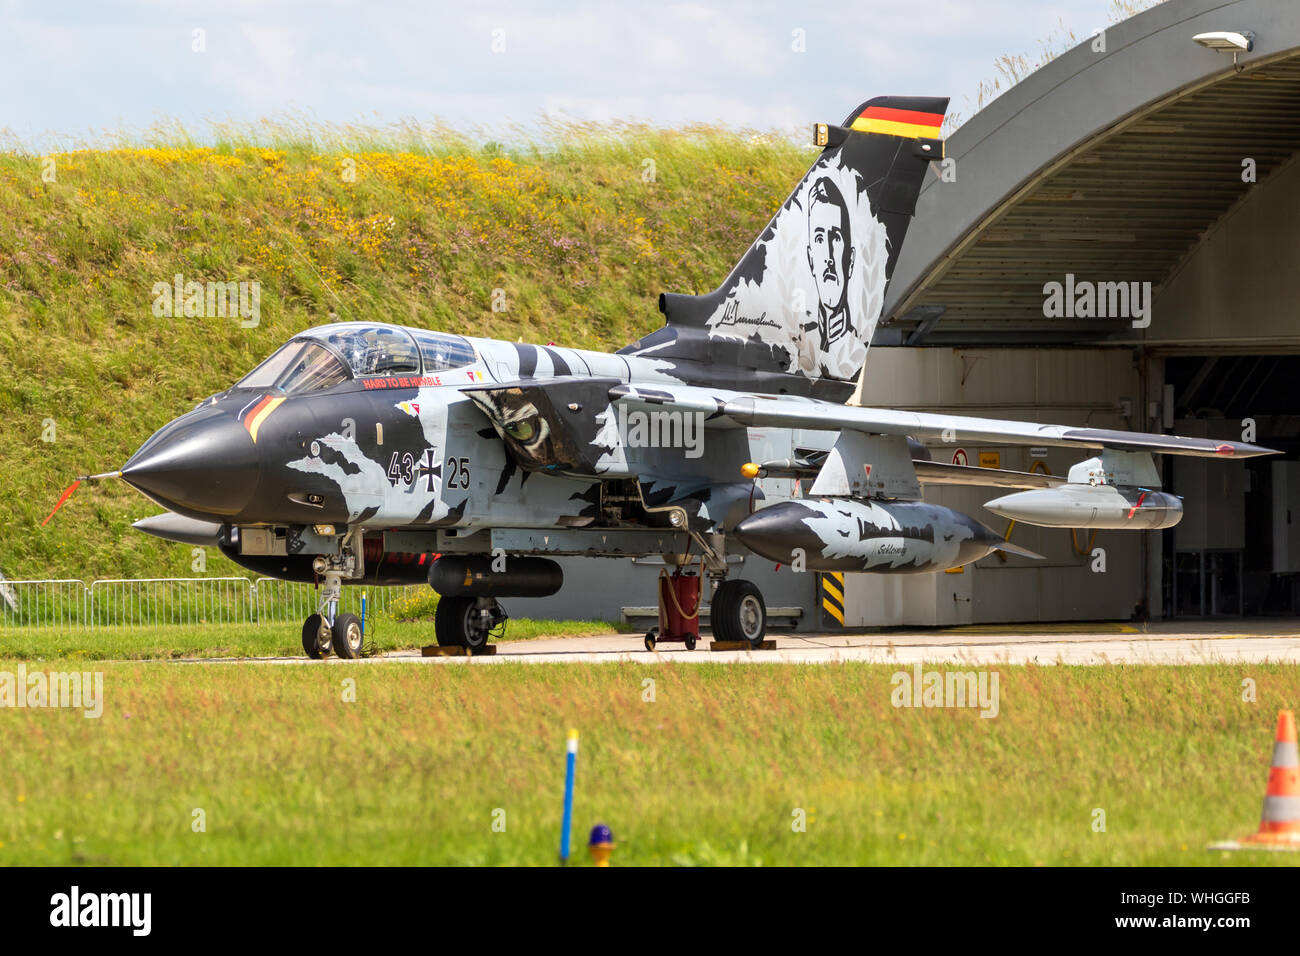 JAGEL, GERMANY - JUN 13, 2019: Special livery painted German Air Force Panavia Tornado fighter bomber jet plane from TLG-51 squadron in front of a har Stock Photo